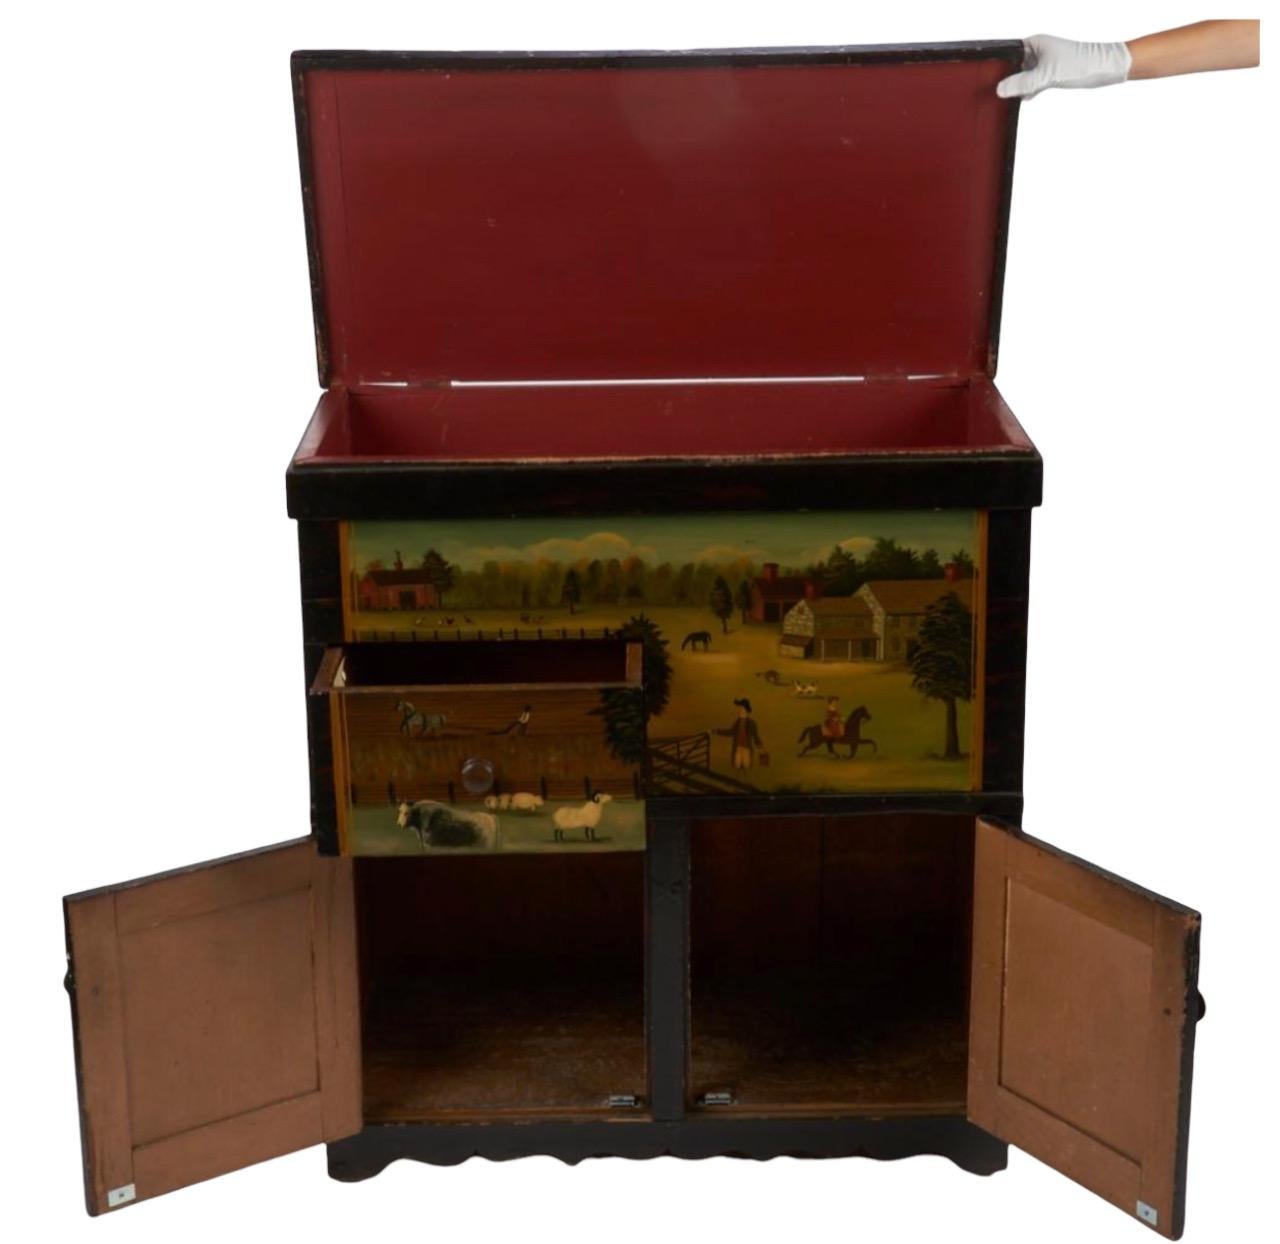 Early 20th Century Ralph Cohoon Cabinet. Commode cabinet with painted panels and drawers depicting a farm scene. It comes with a label on the inside of the drawer that reads 